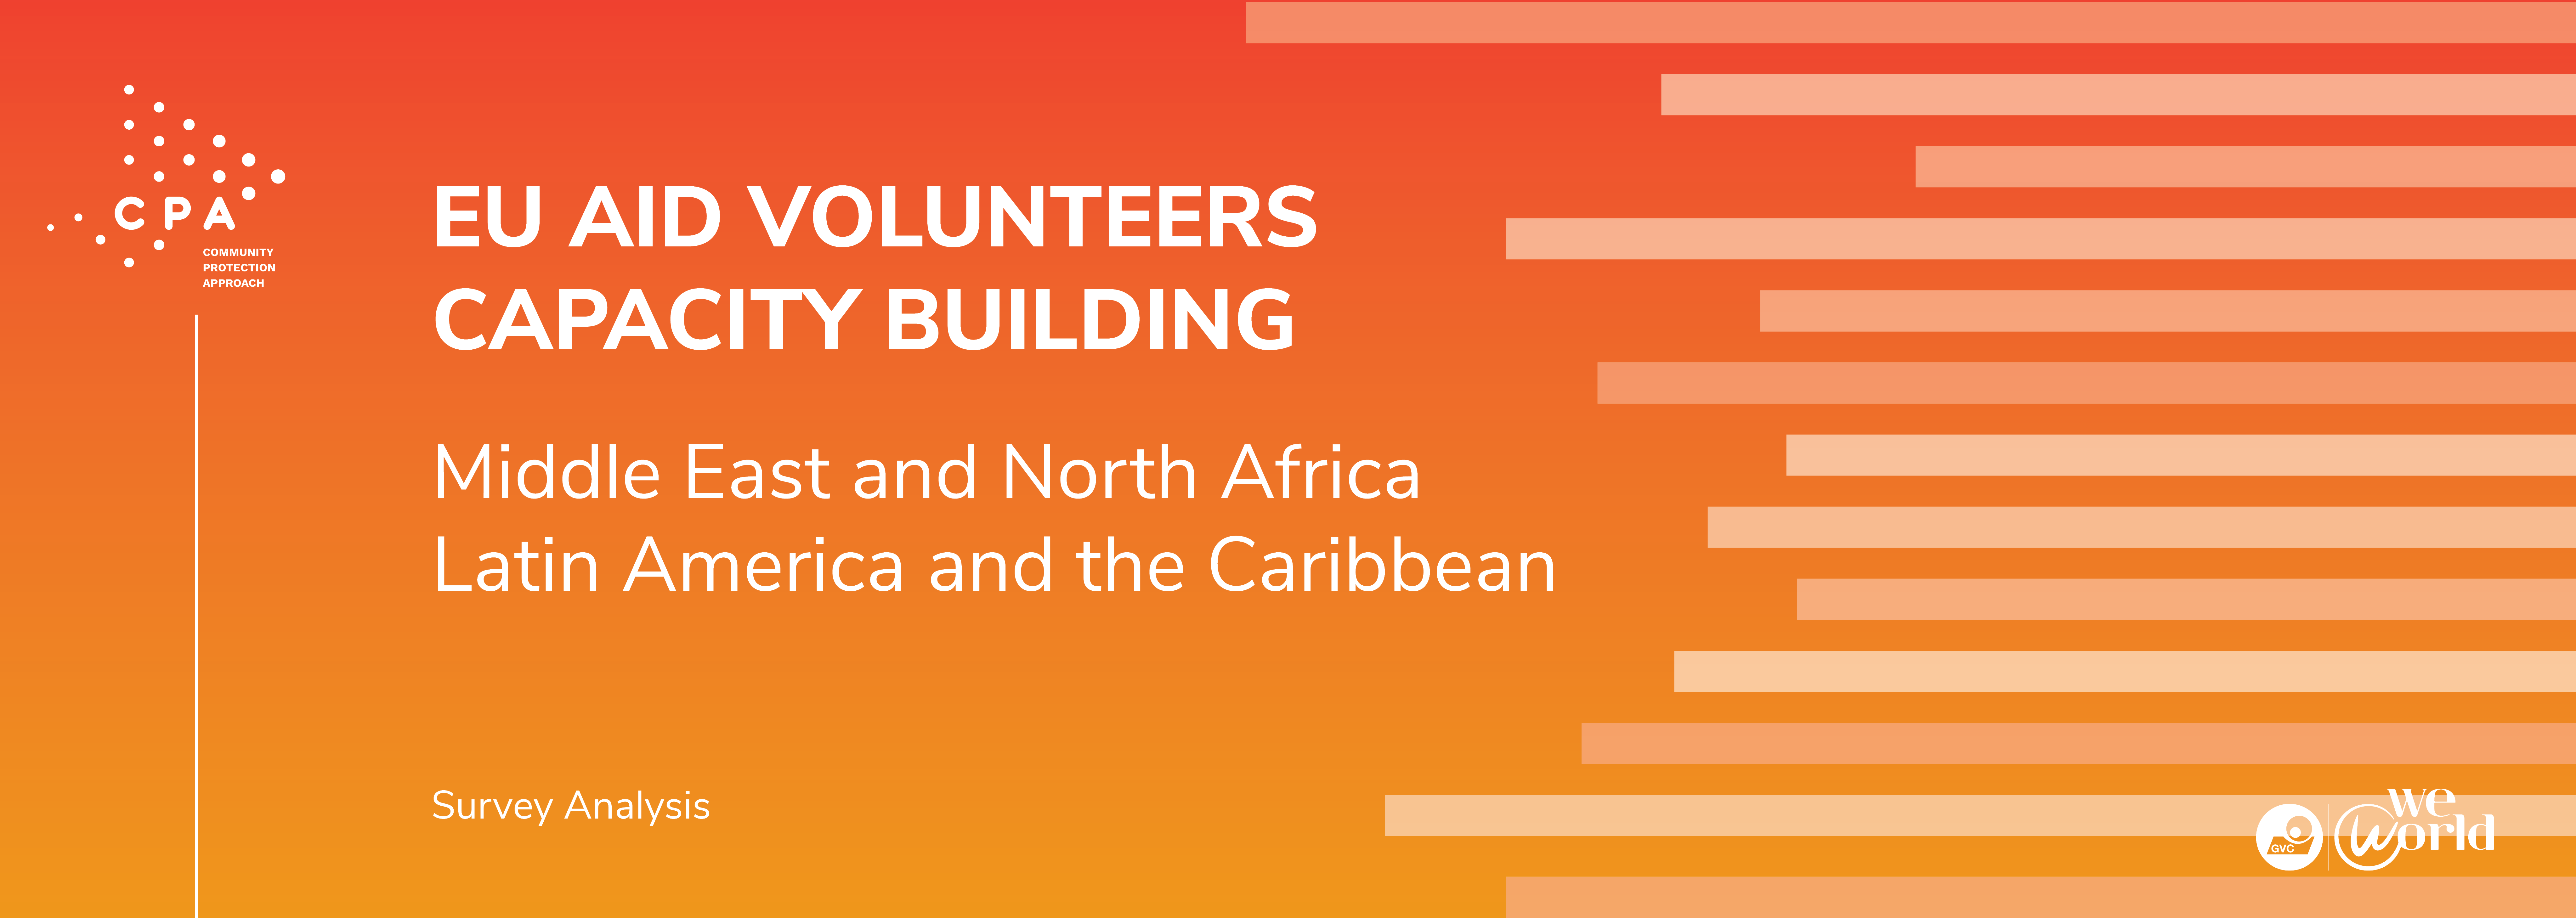 Capacity Building. Survey Analysis – Middle East and North Africa Latin America and the Caribbean